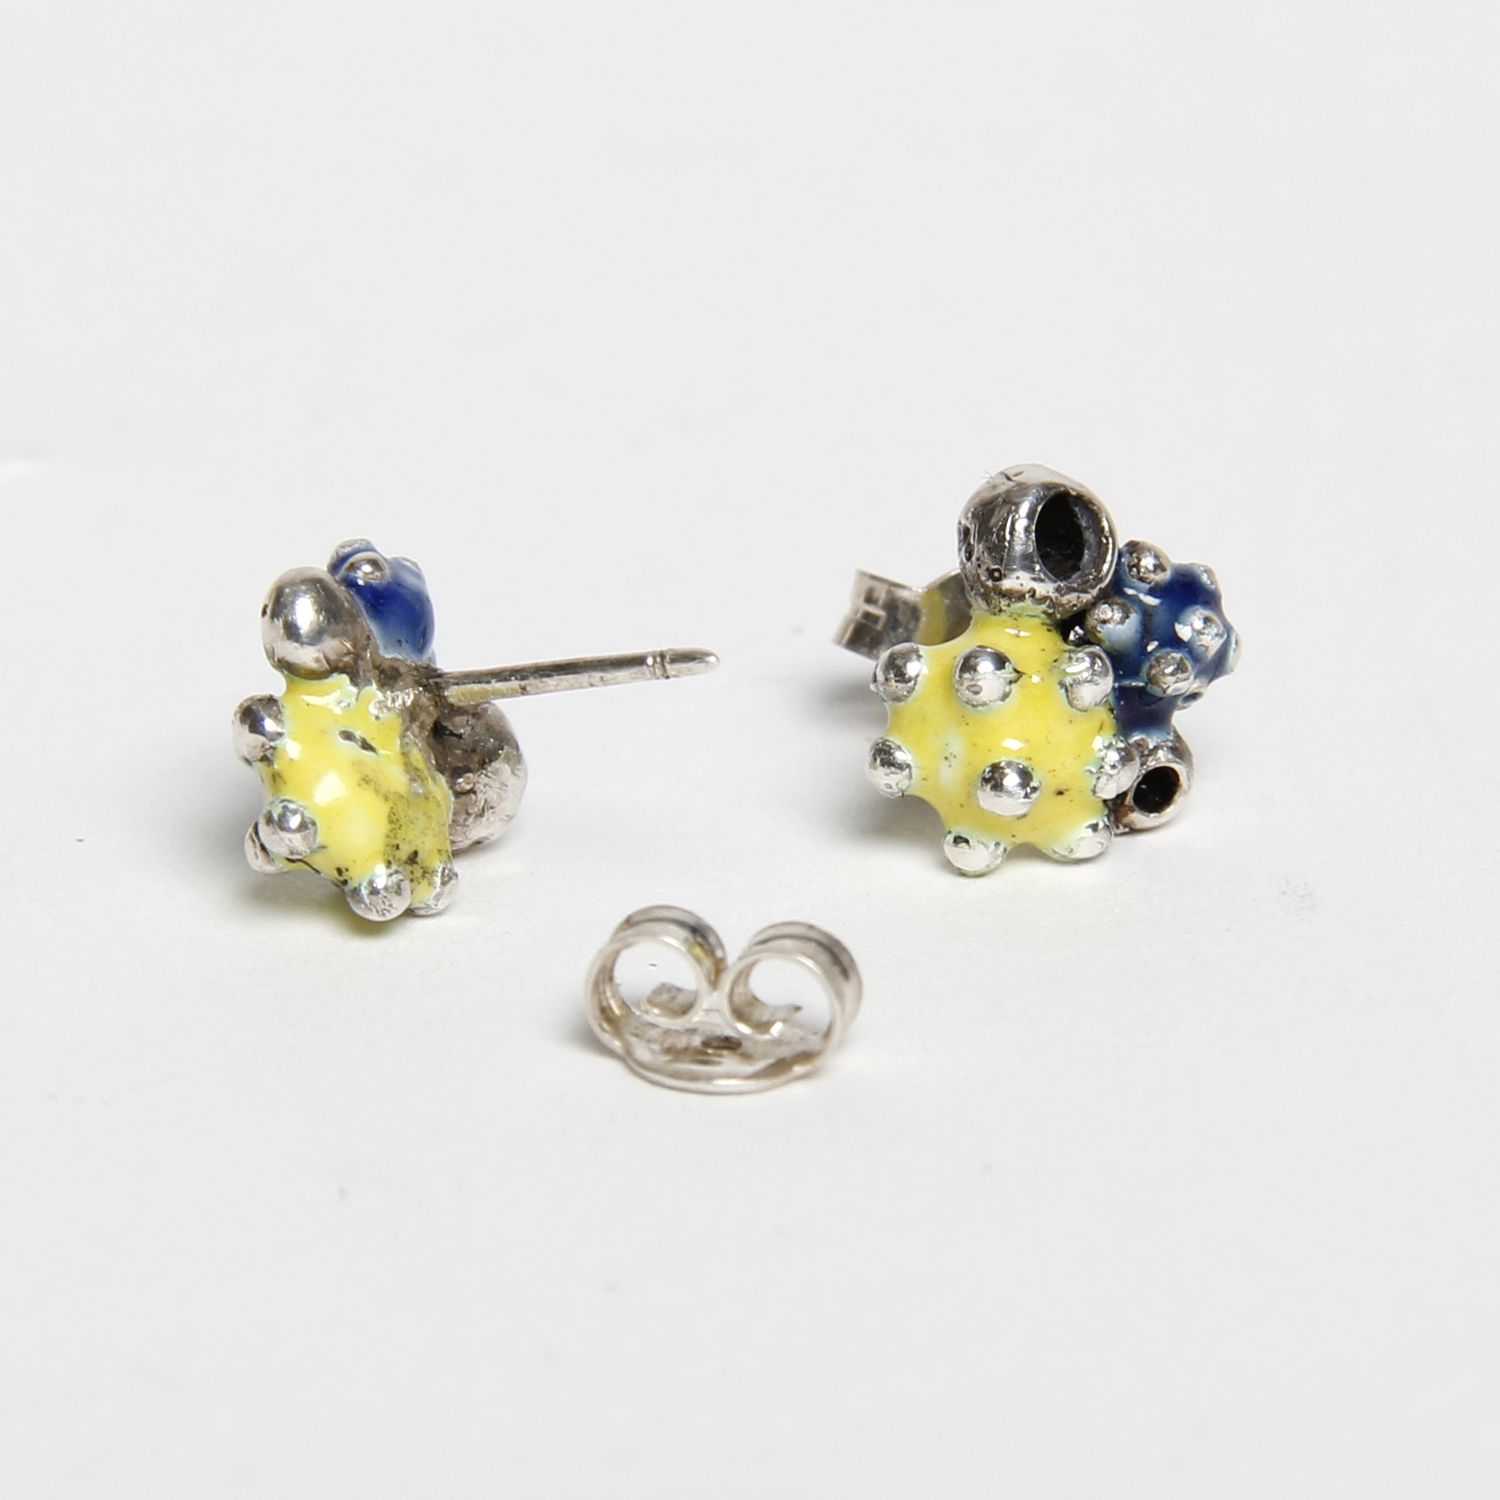 Cinelli Maillet: Pear Earrings Product Image 2 of 2